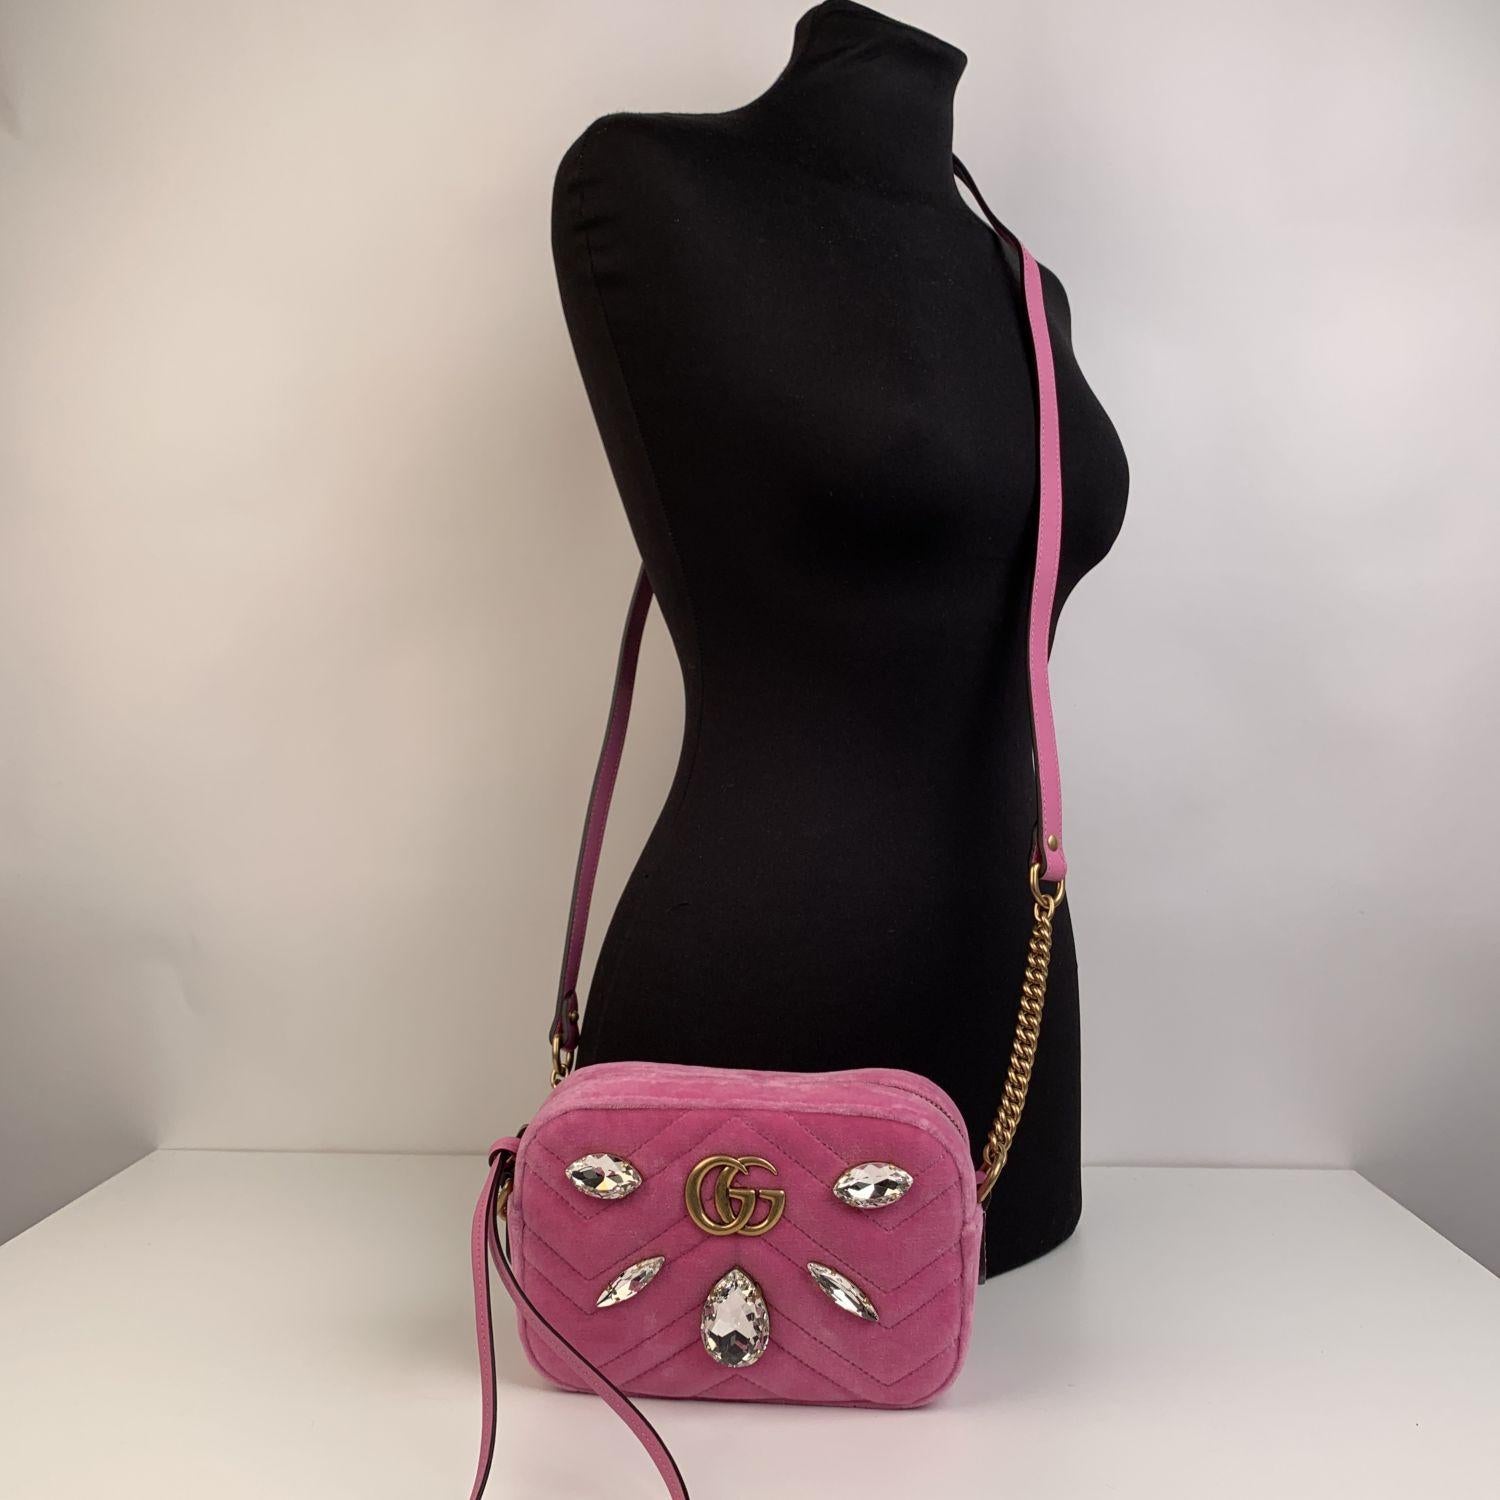 Lovely Gucci 'Mini GG Marmont' camera bag in pink matelassé velvet. The bag features a chevron quilted motif, double GG logo in antiquated gold tone was inspired by the Running G motif, from the Gucci archieves of the 1970s and 5 beautiful bold